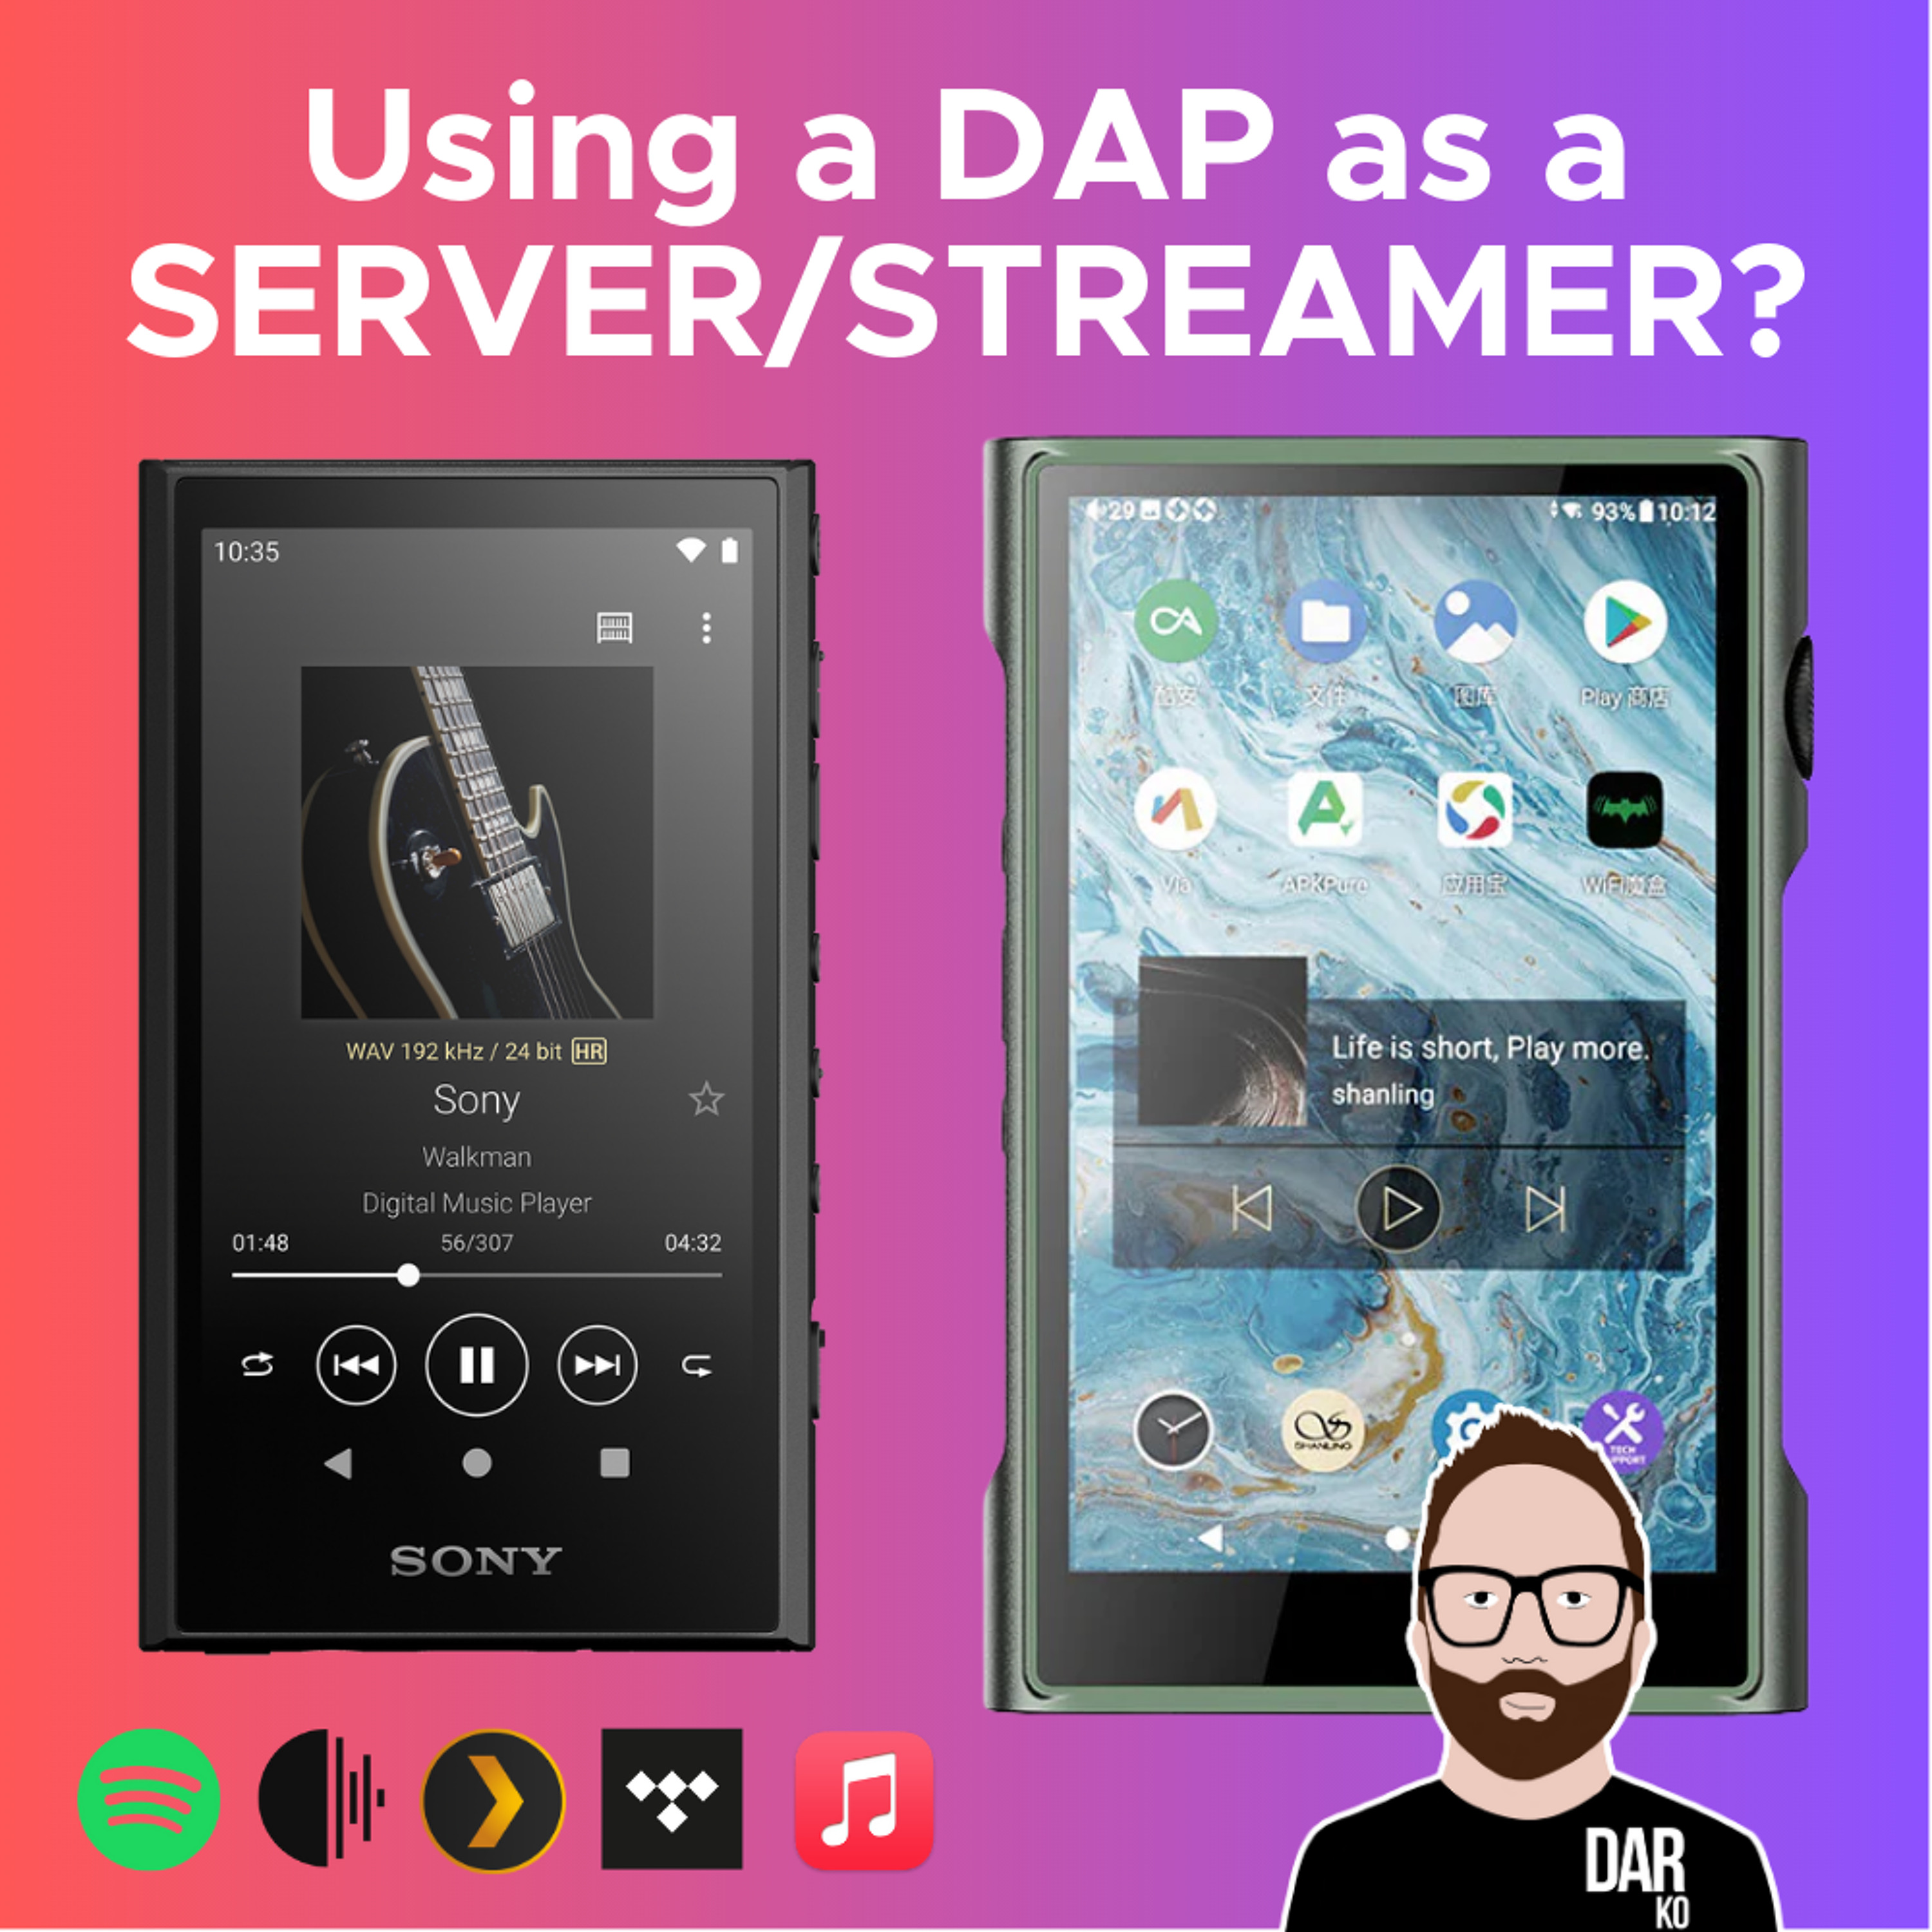 Using a portable audio player as a music server and/or streamer?